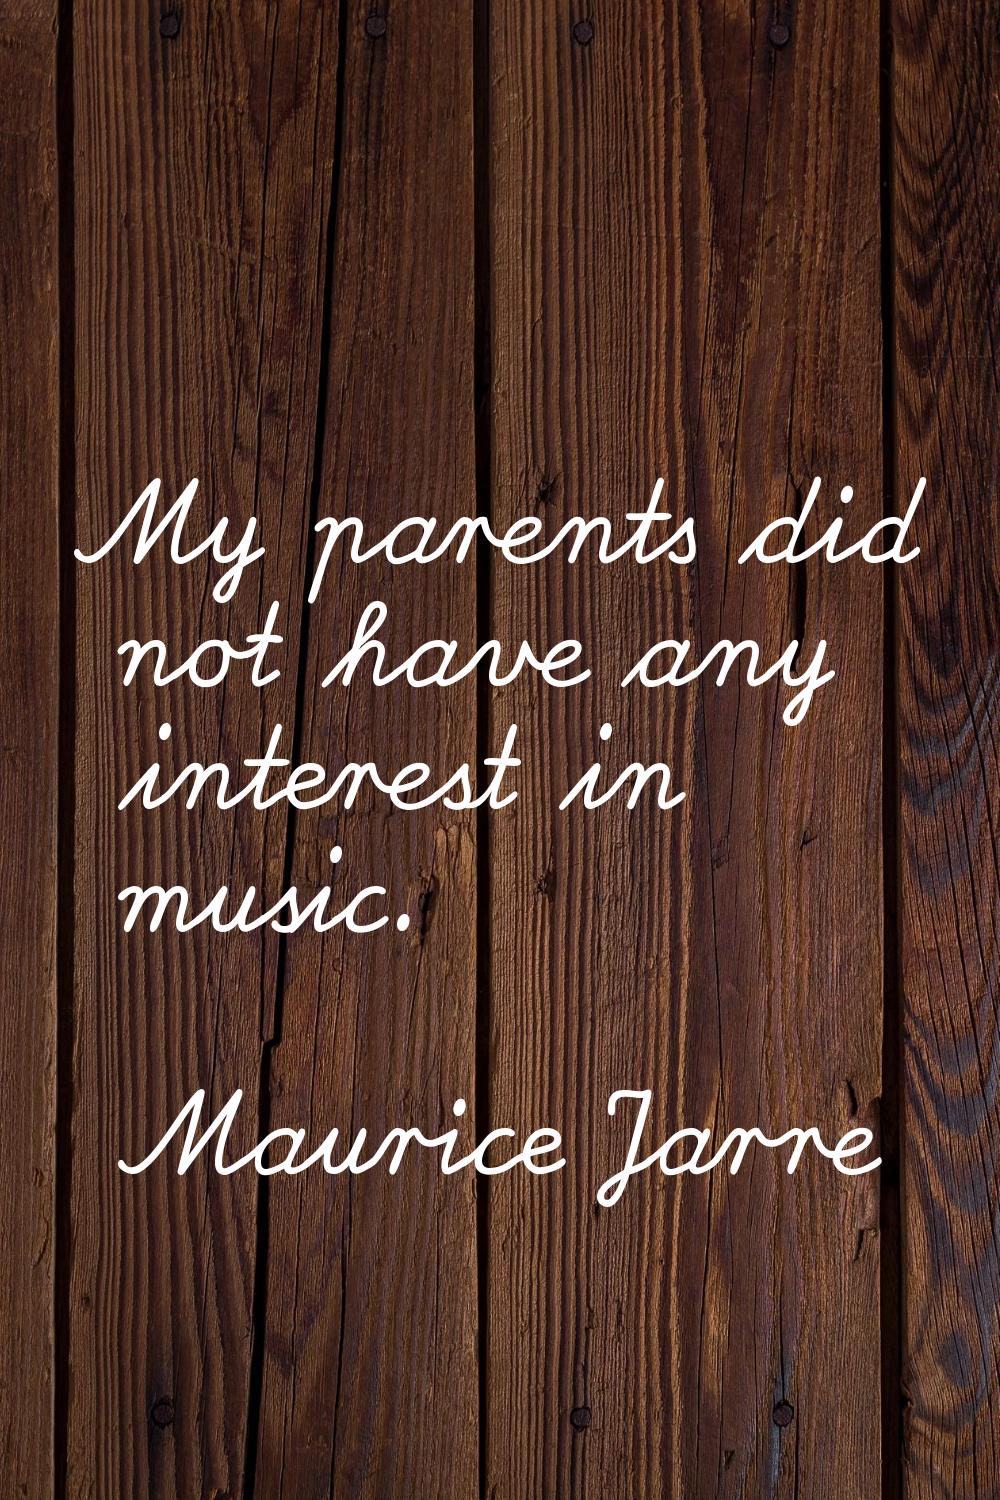 My parents did not have any interest in music.